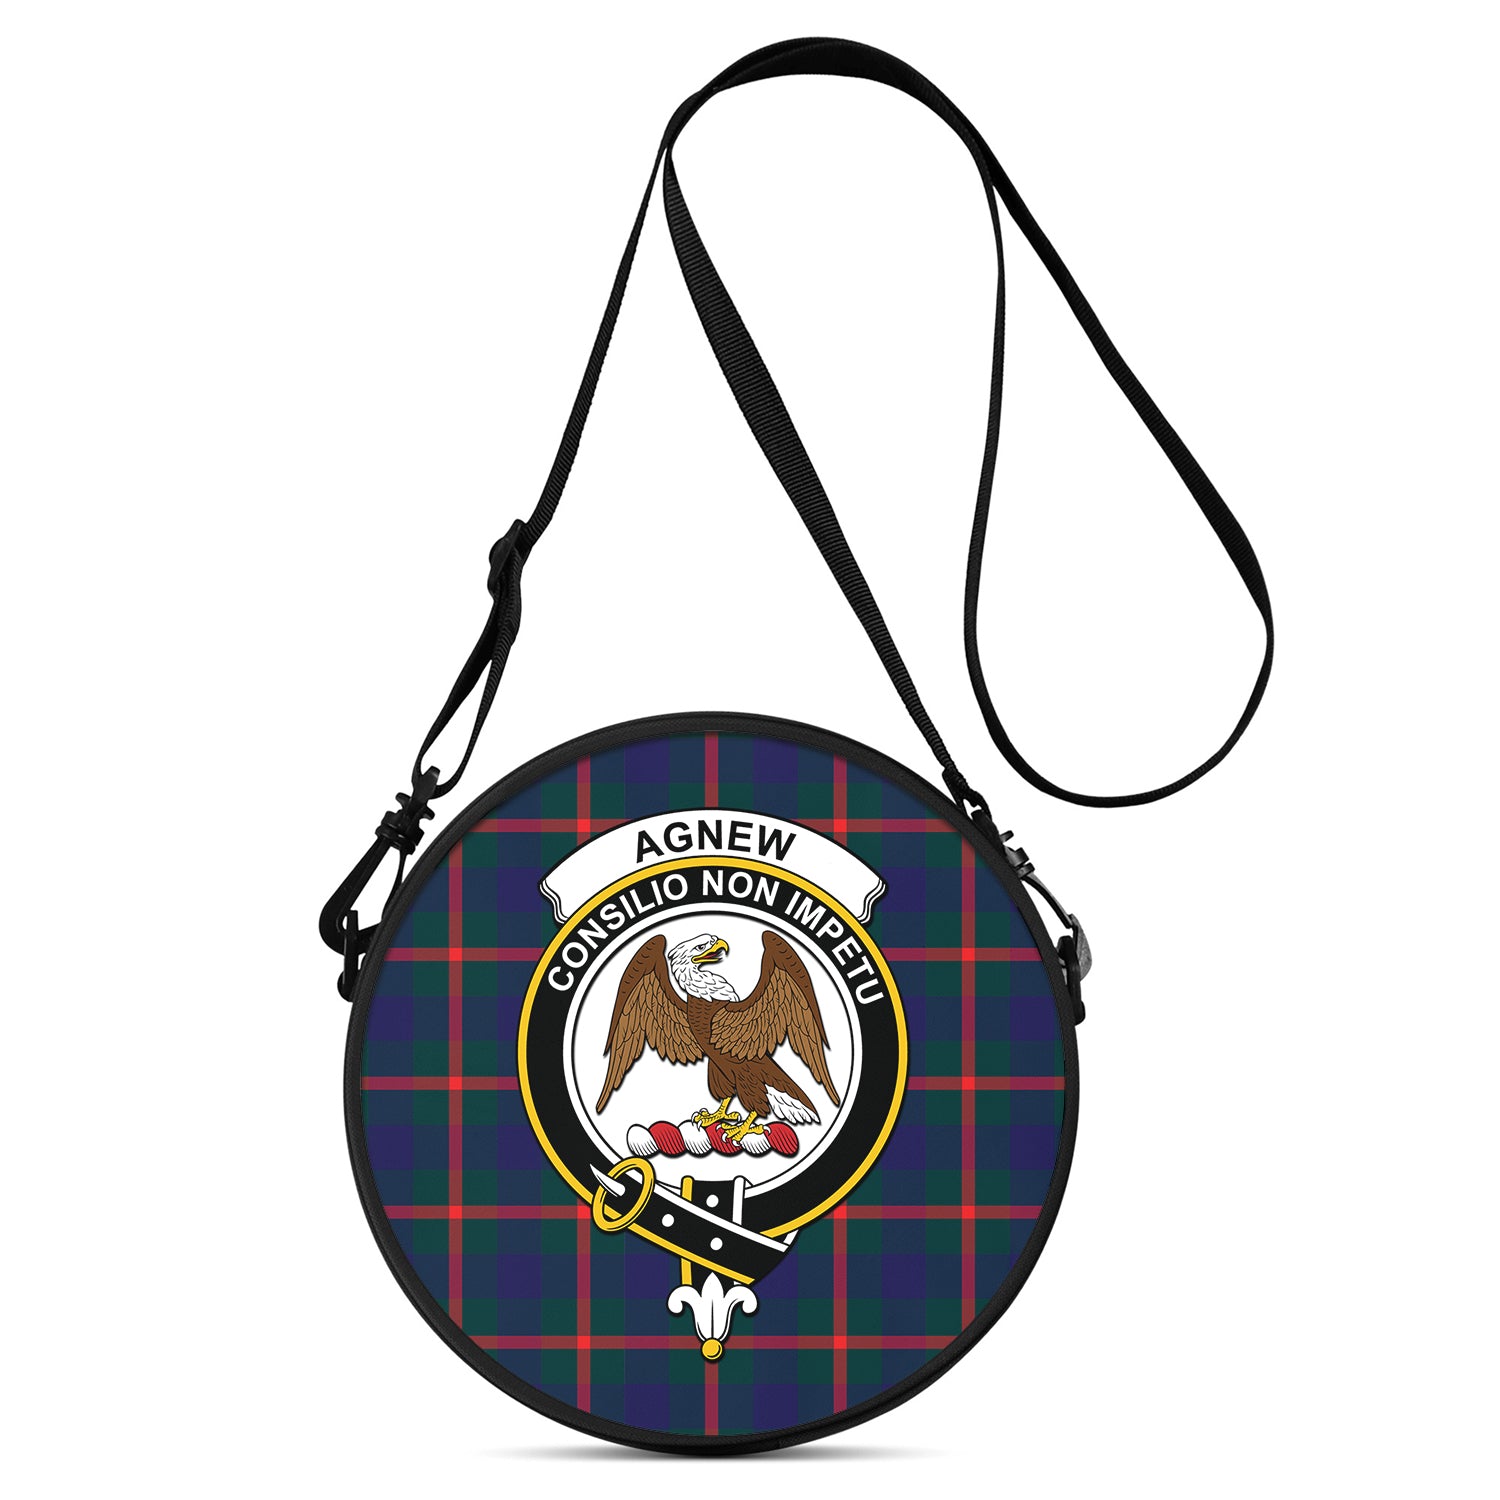 Agnew Modern Tartan Round Satchel Bags with Family Crest One Size 9*9*2.7 inch - Tartanvibesclothing